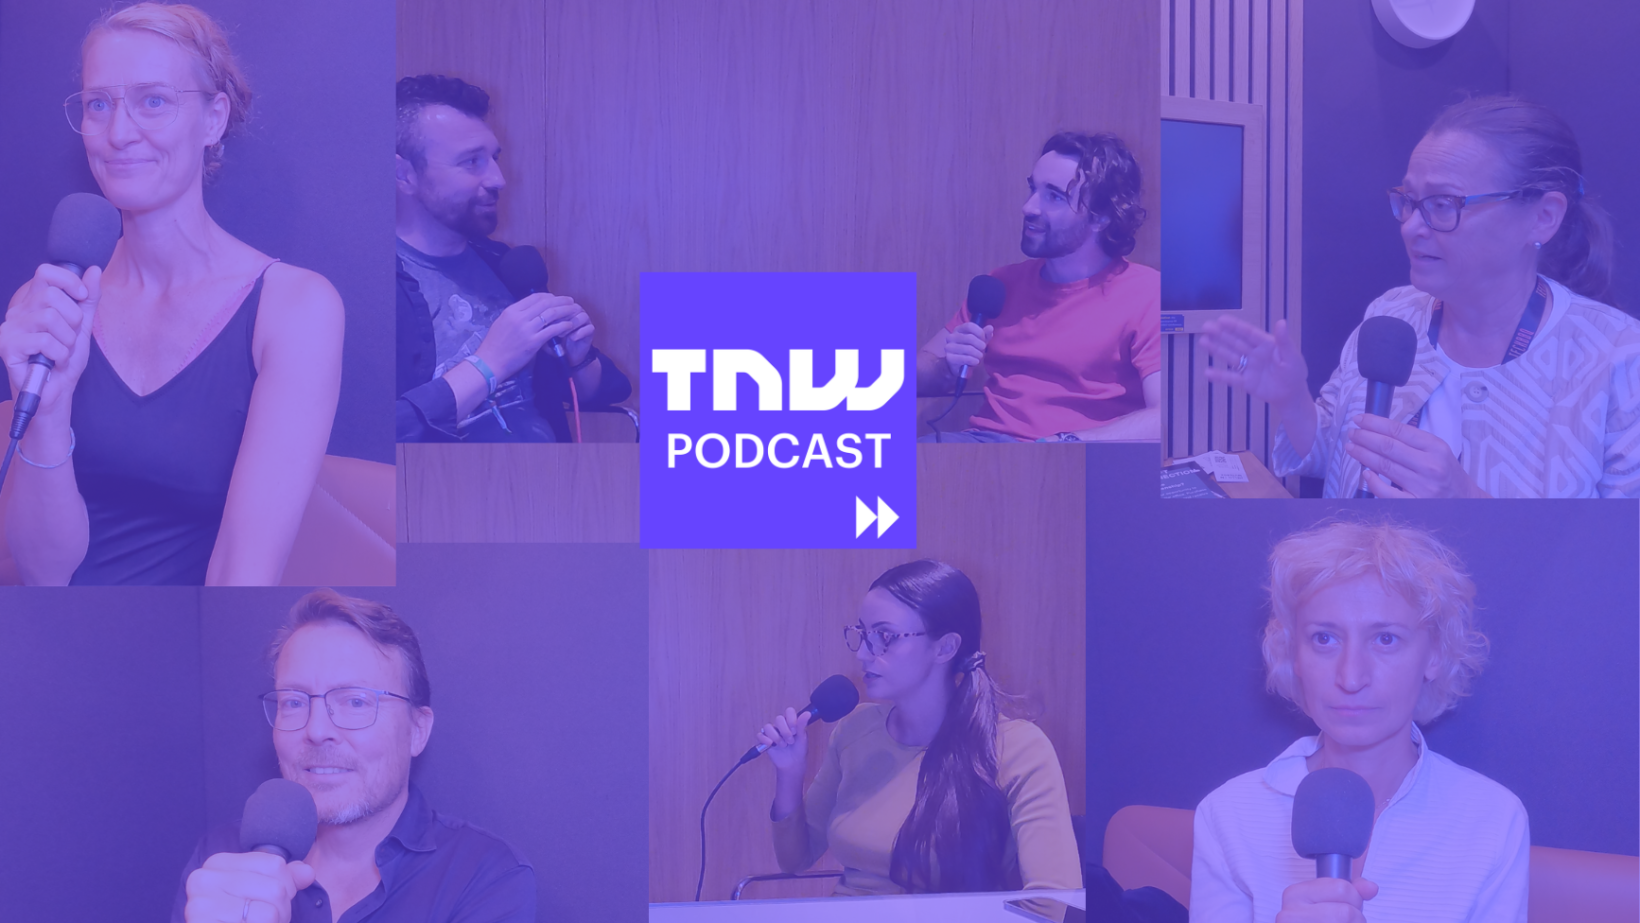 TNW Podcast: Gerard Grech on startups, governments, and academia